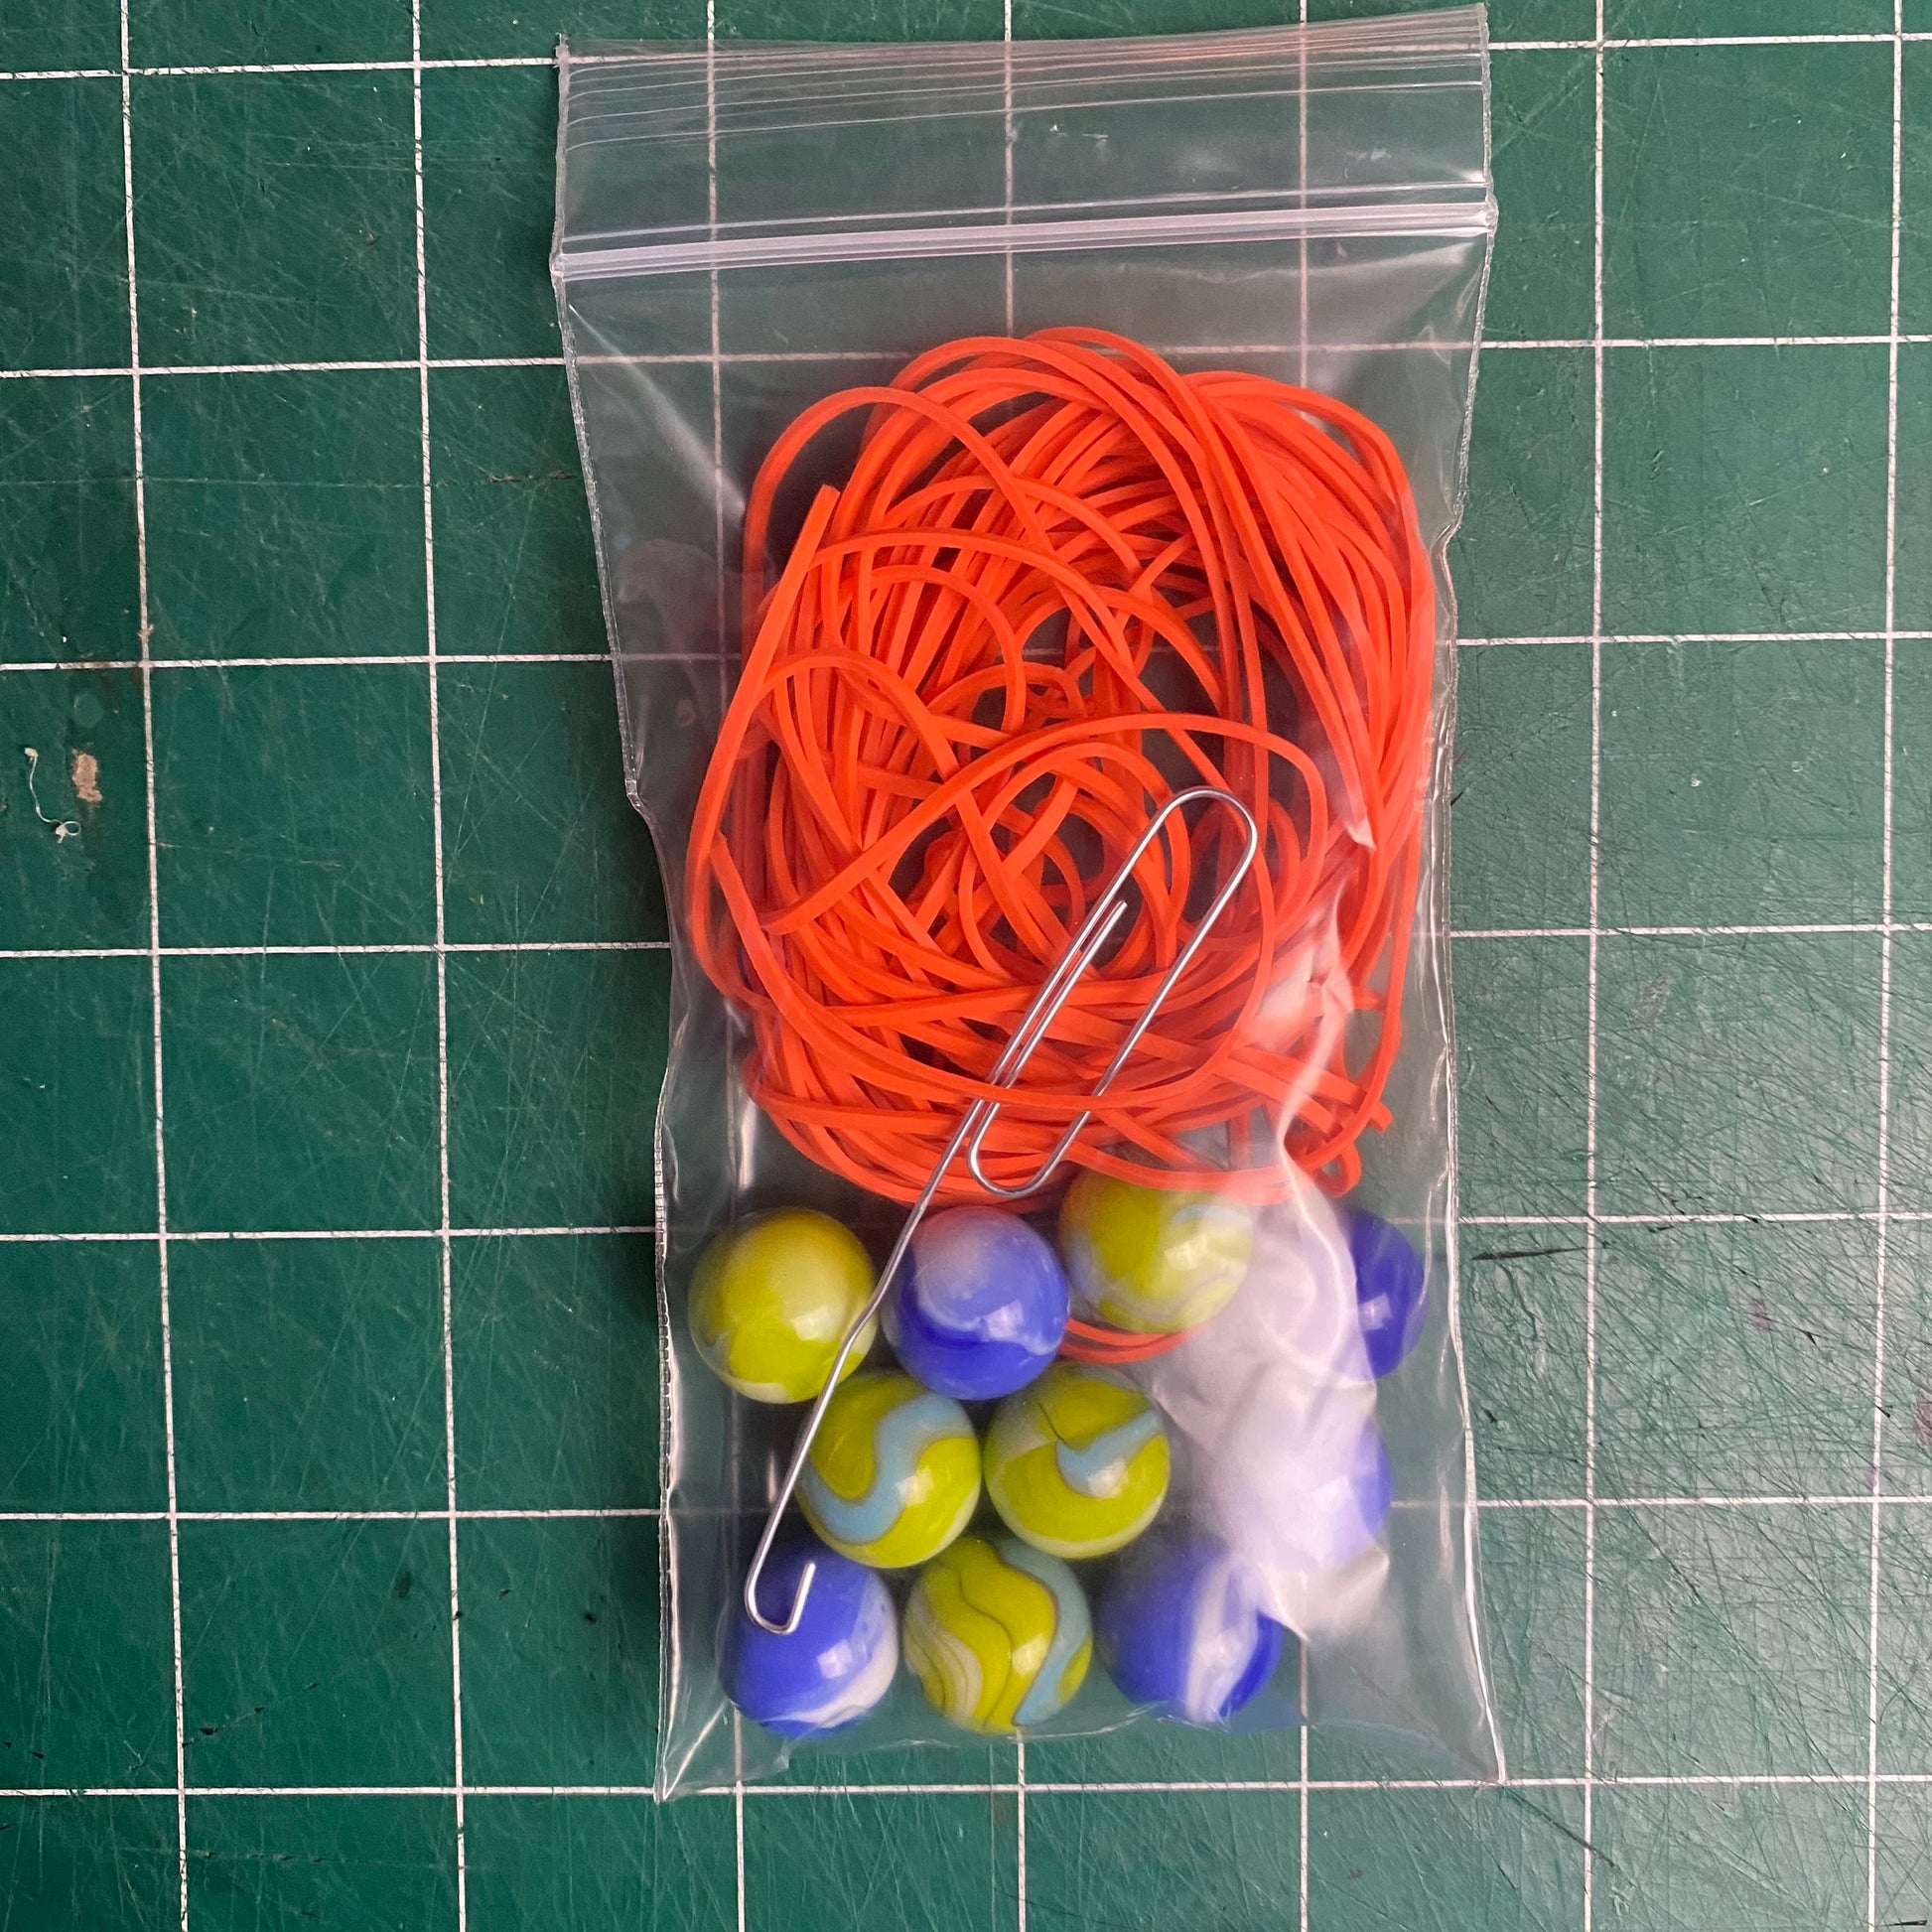 Small poly bag containing 40 rubber bands, 10 marbles, and a paper clip "hook tool" 